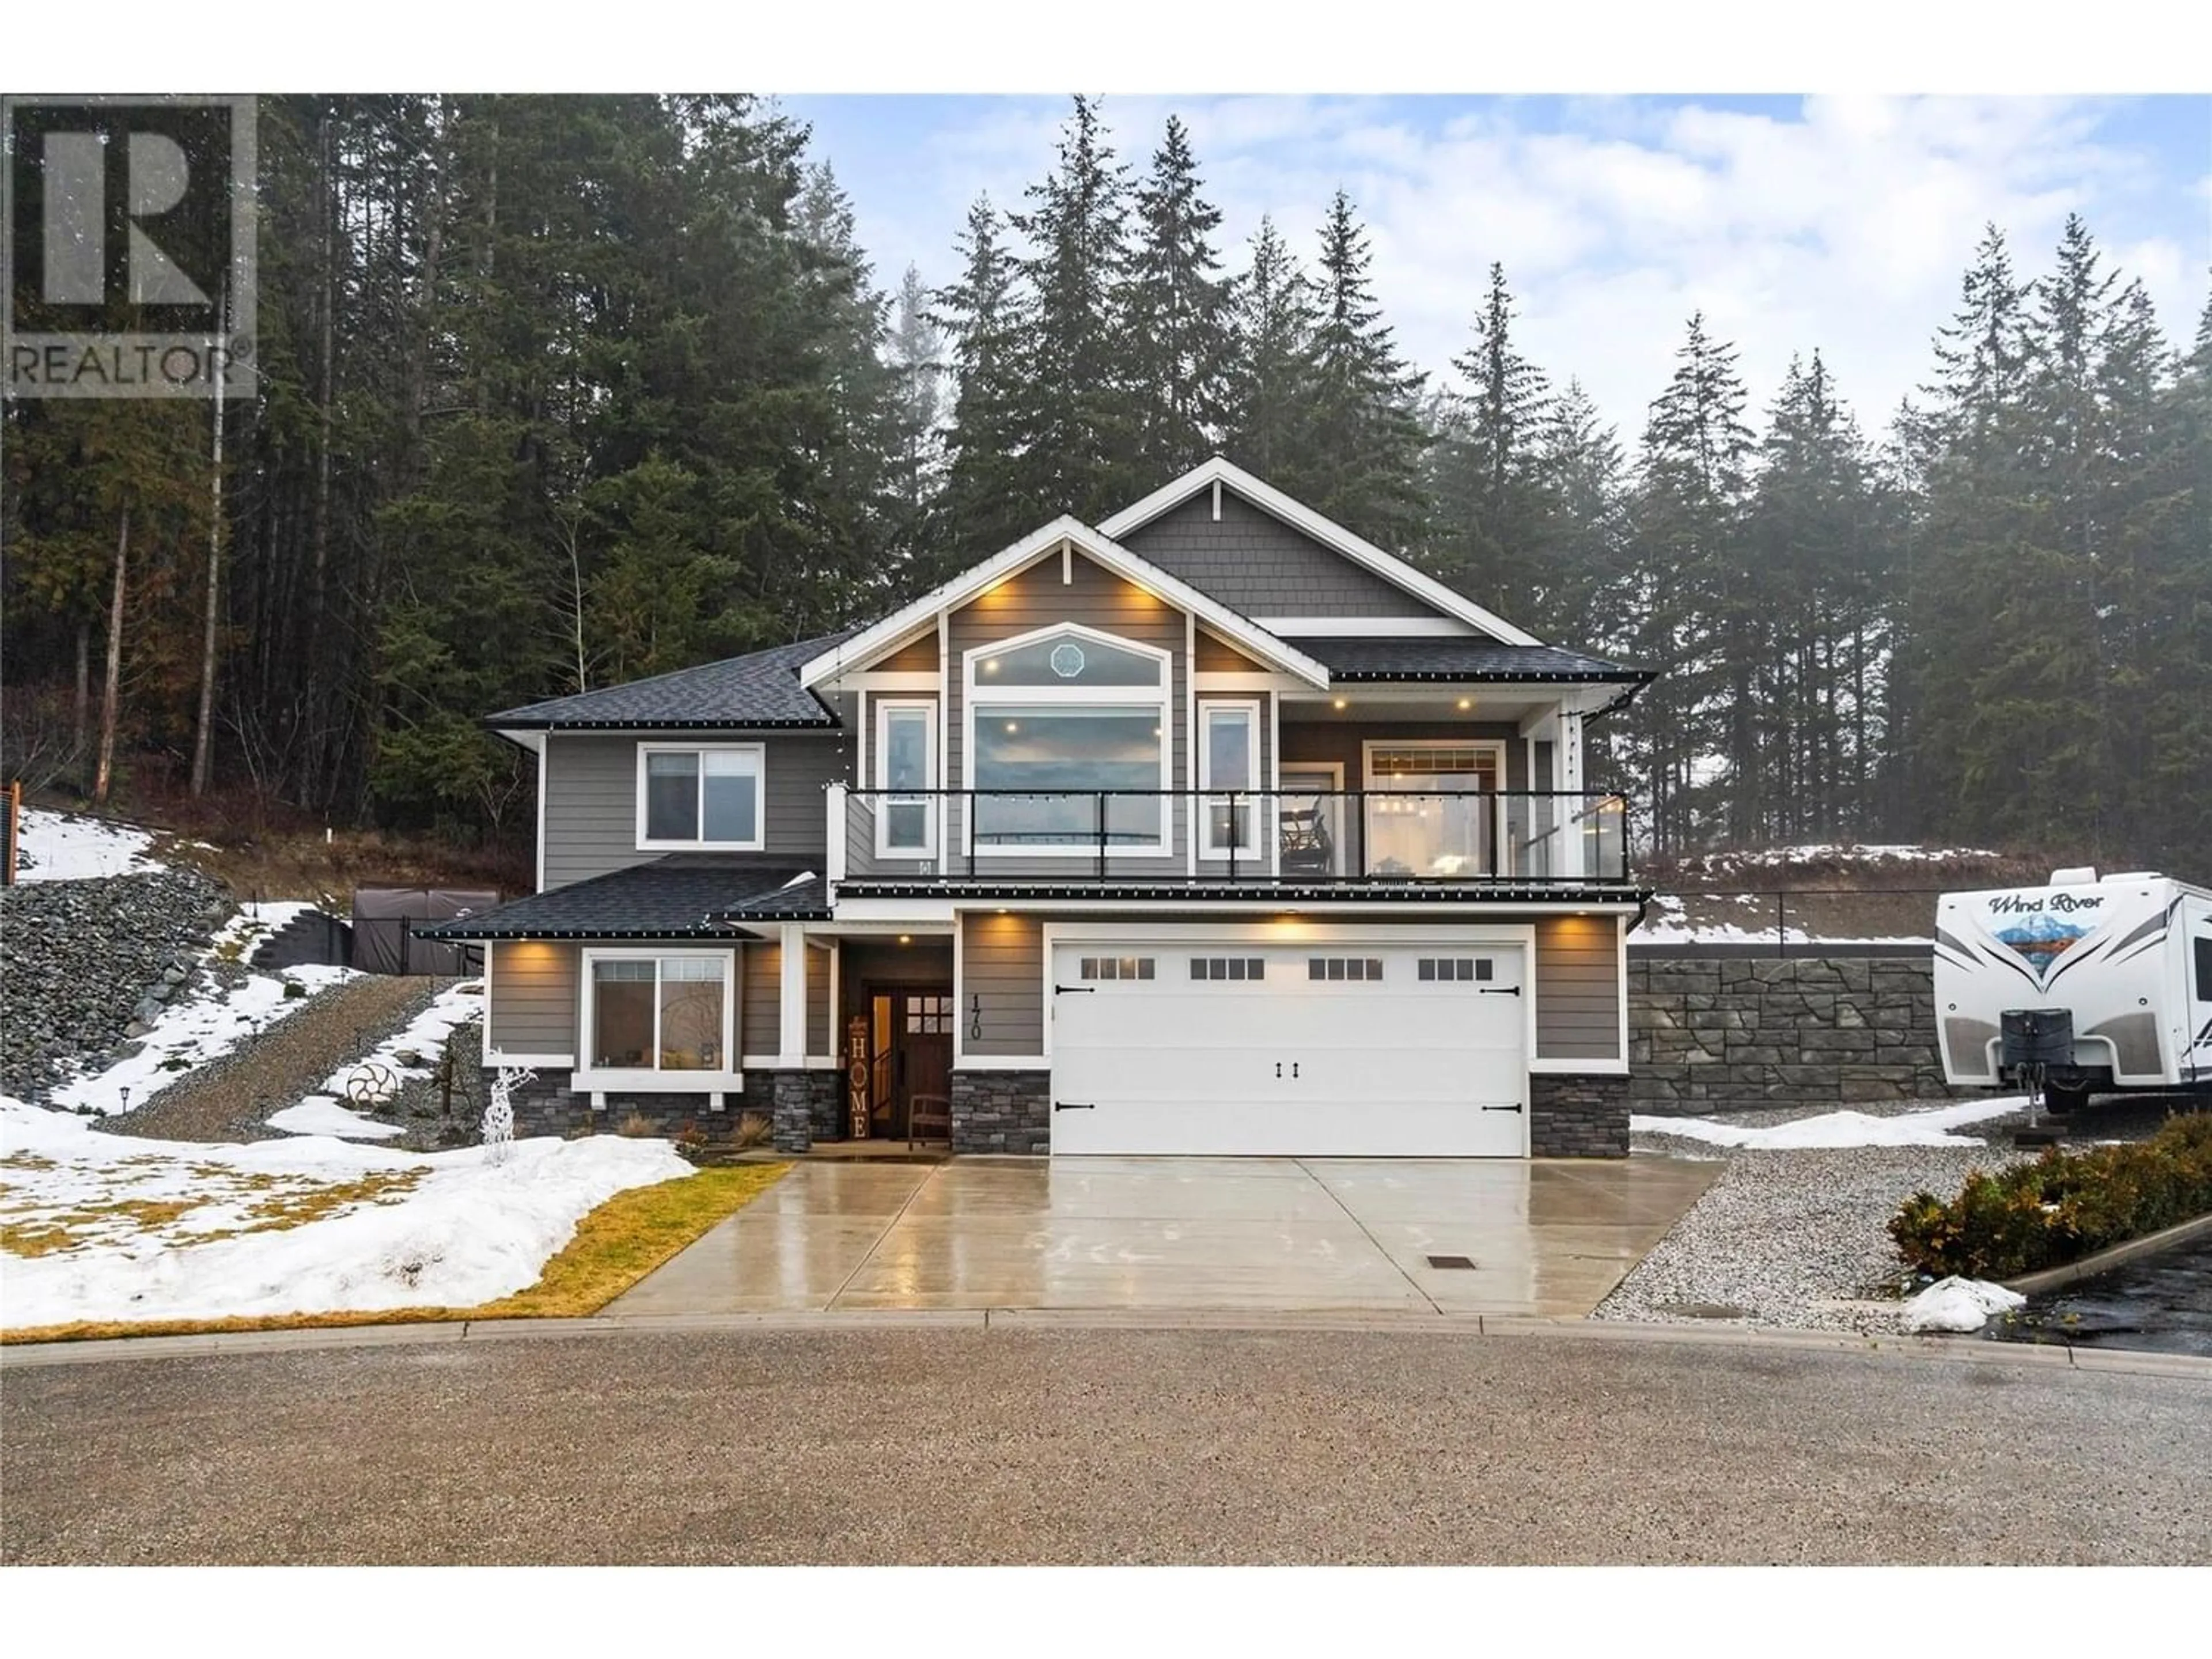 Home with stone exterior material for 170 Vetter Place, Enderby British Columbia V0E1V1